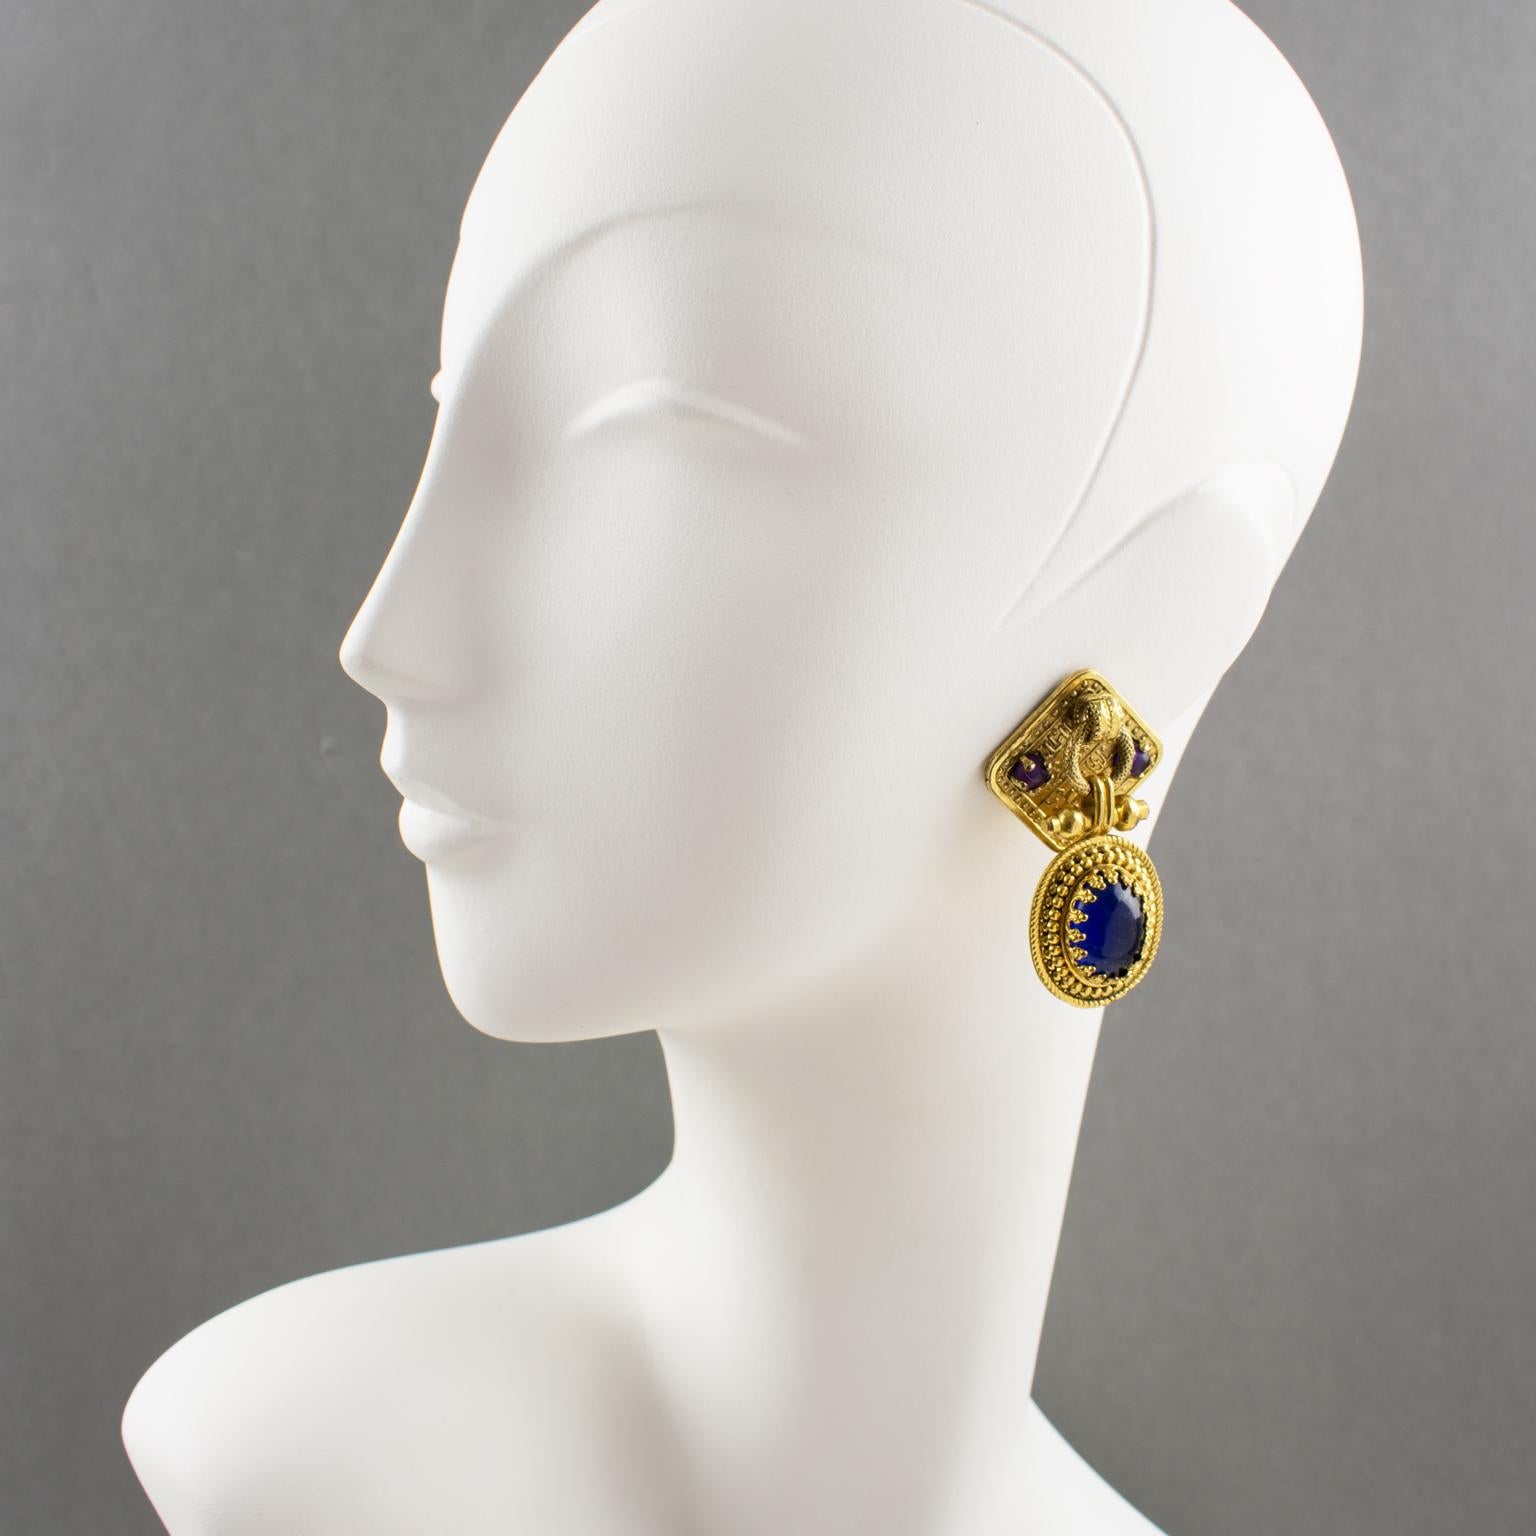 Thrilling Zoe Coste for Reminiscence gilt metal dangling clip-on earrings. Featuring geometric door-knocker shape with gilt metal all textured ornate with cobalt blue and purple poured glass cabochon. Marked underside with company logo: